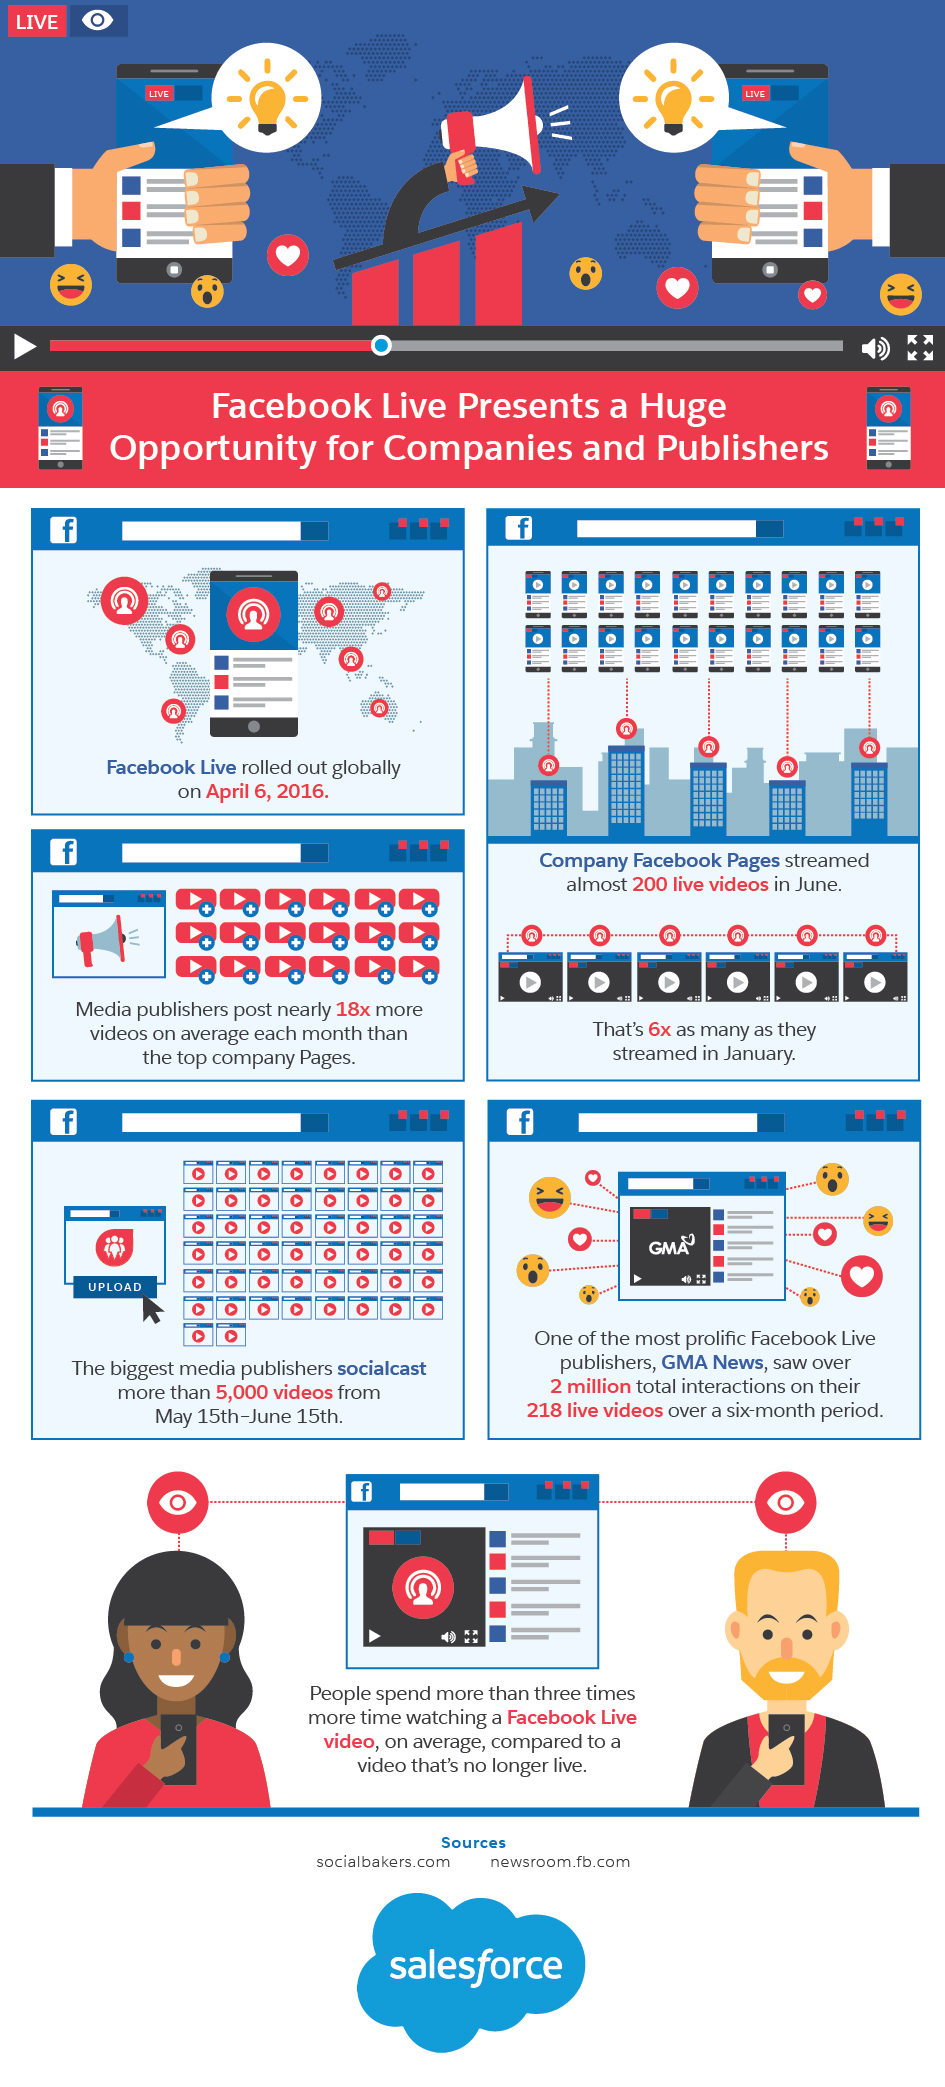 Quelle: http://www.socialmediatoday.com/social-business/huge-opportunity-facebook-live-infographic